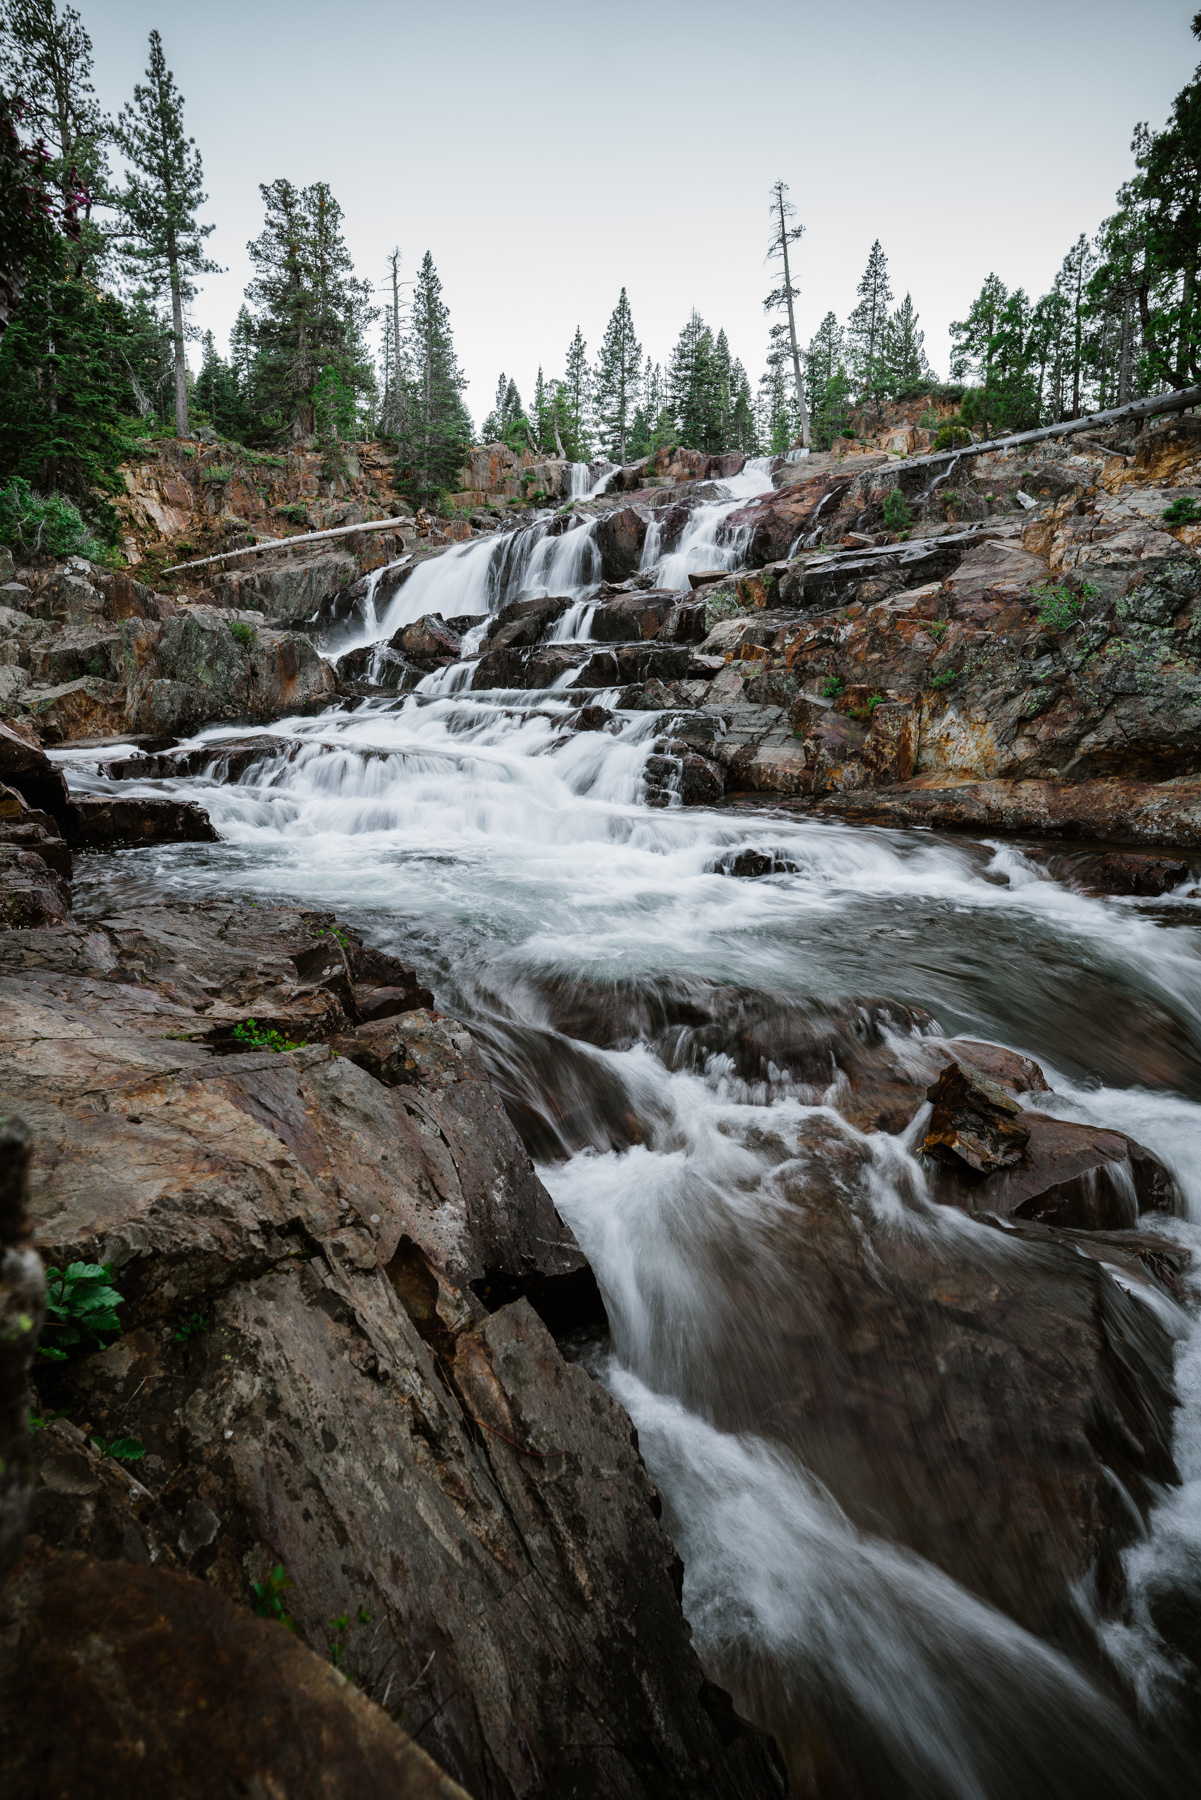 How to Photograph Waterfalls - Glenn Alpine Waterfall South Lake Tahoe -Landscape Photography by Bessie Young Photography